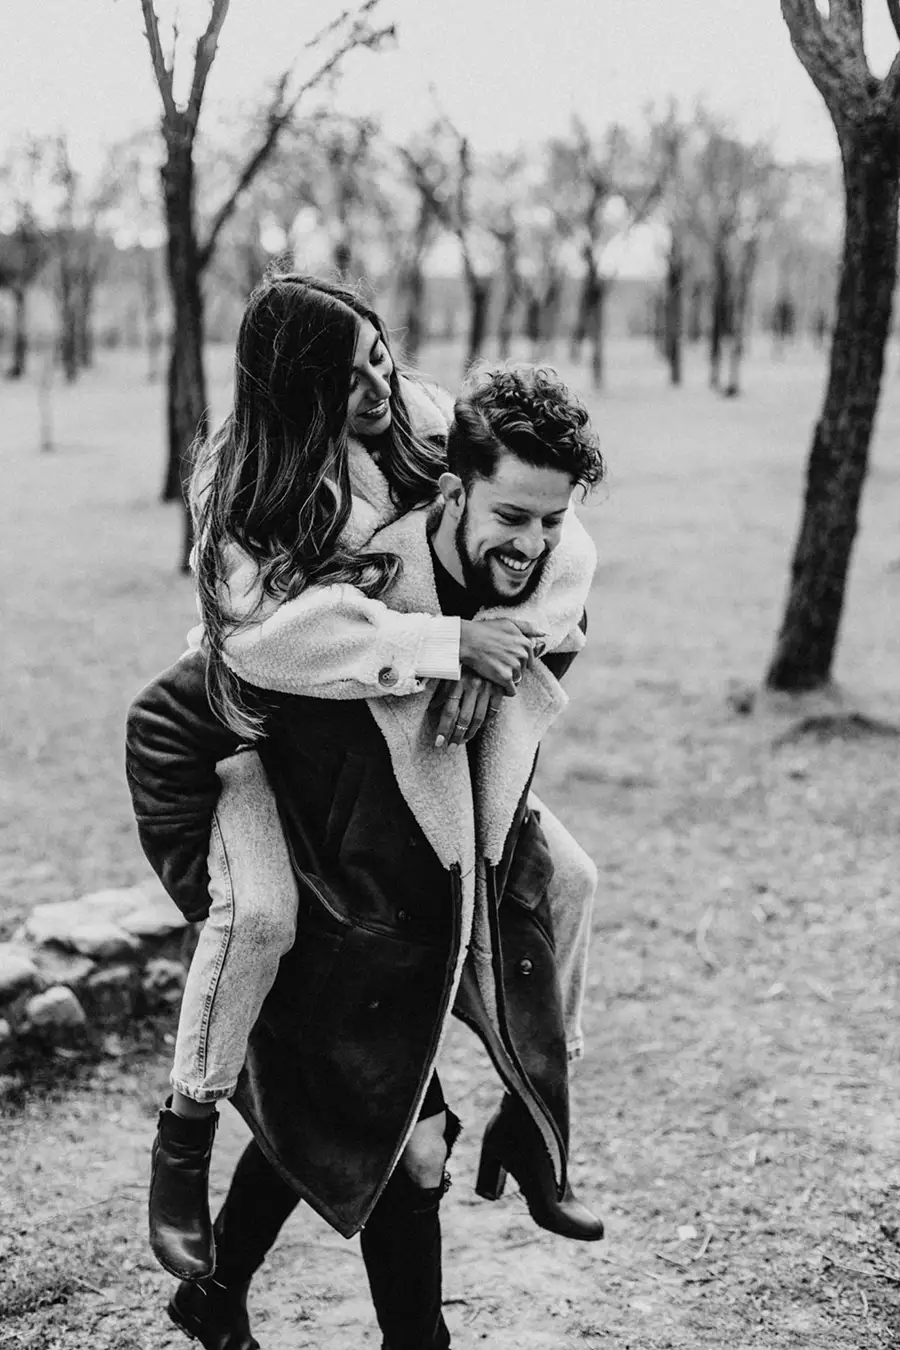 Hire a Photographer for Your Dream Proposal Shoot